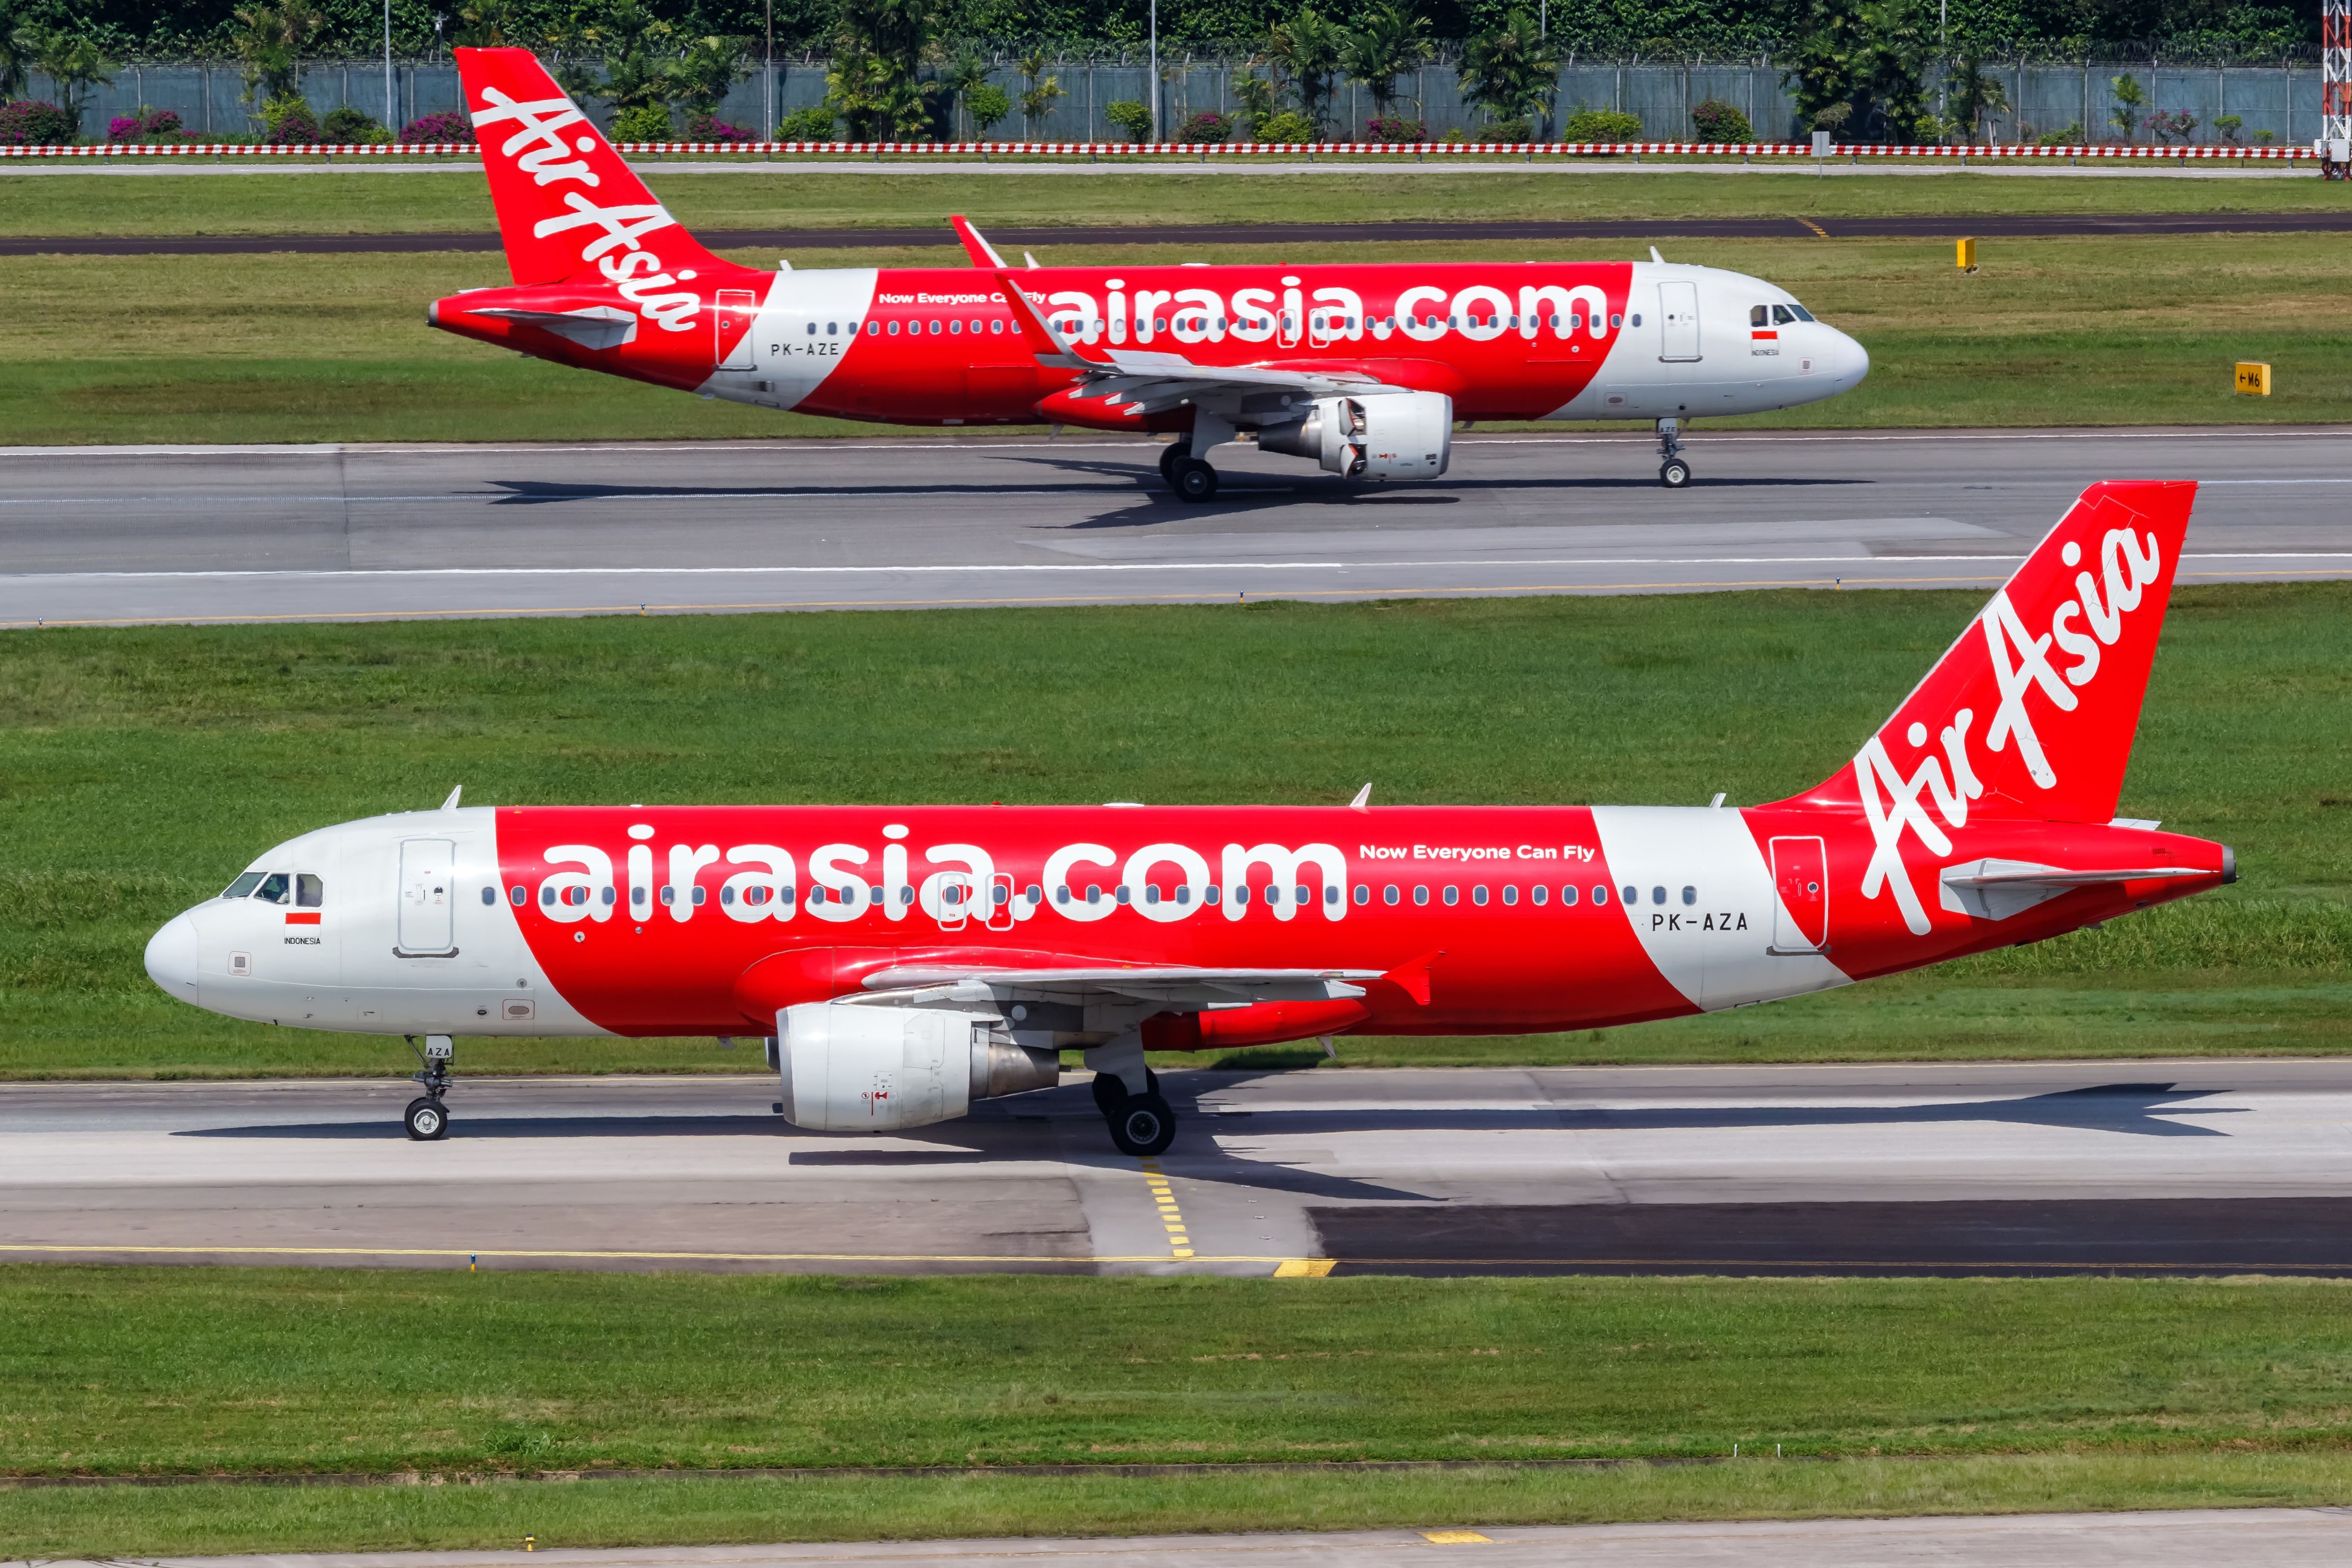 Indonesia AirAsia Airbus A320 airplanes at Changi Airport (SIN) in Singapore